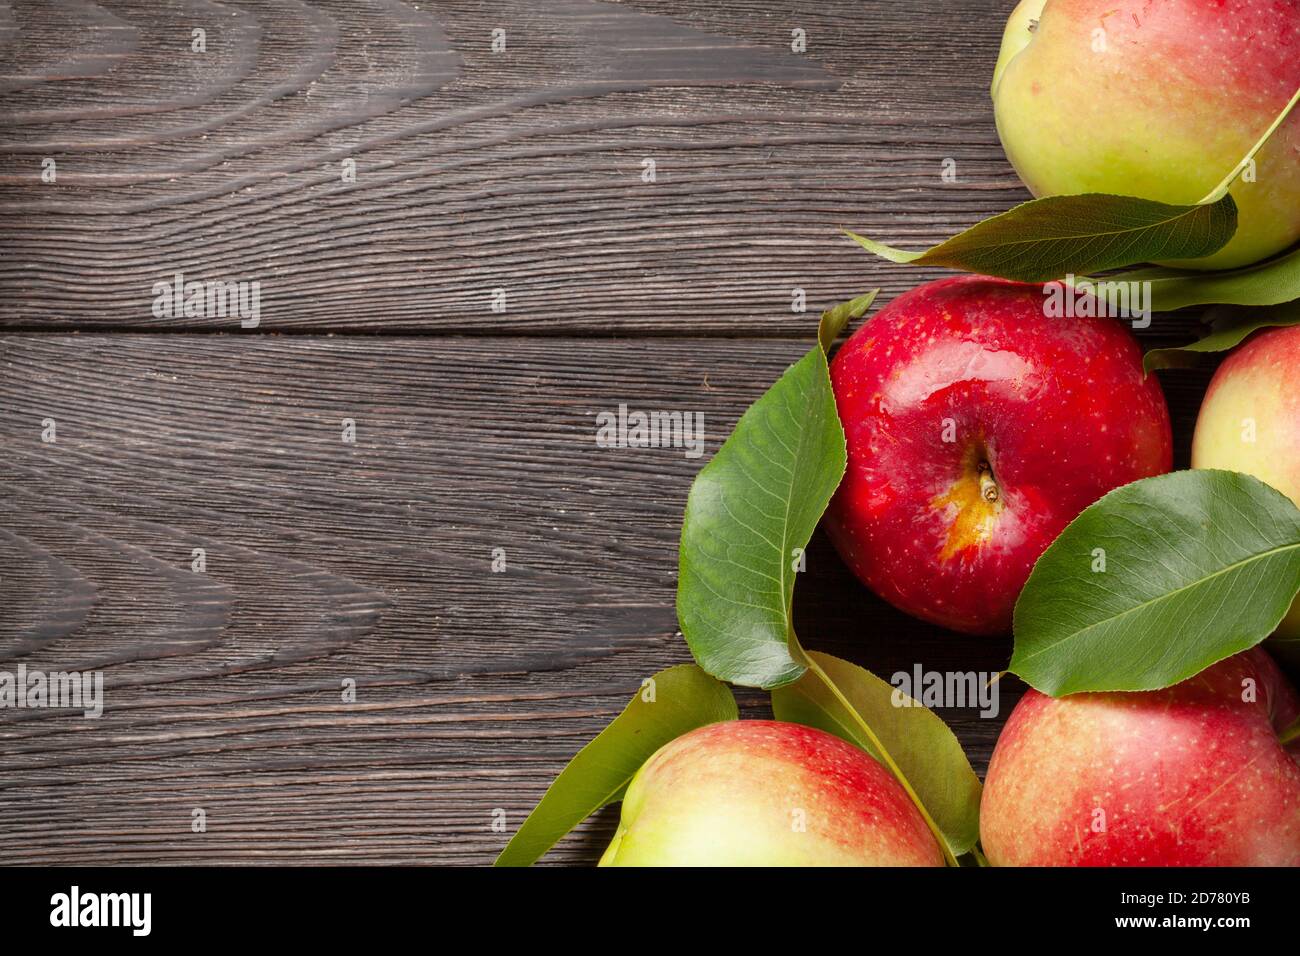 Ripe garden apple fruits on wooden table. Top view flat lay with copy space Stock Photo